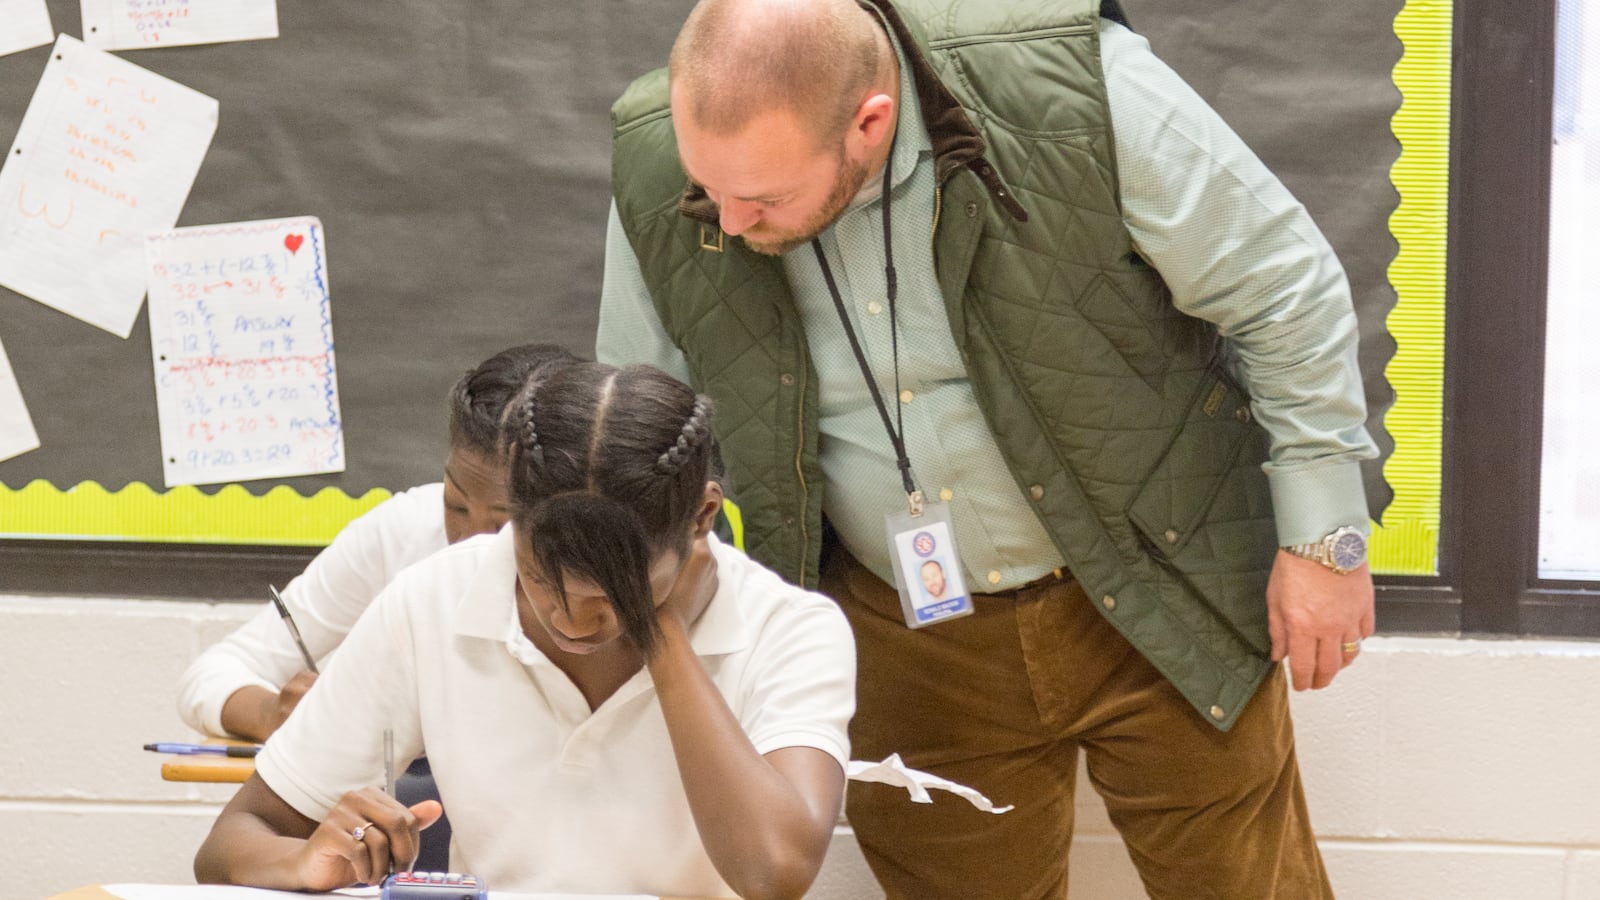 Ronnie Mackin checks on a student's work in 2016 when he was principal at Raleigh Egypt Middle School. Mackin was chief administrator the following school year at Trezevant High School, now the center of several investigations that started as a result of Mackin's allegations.